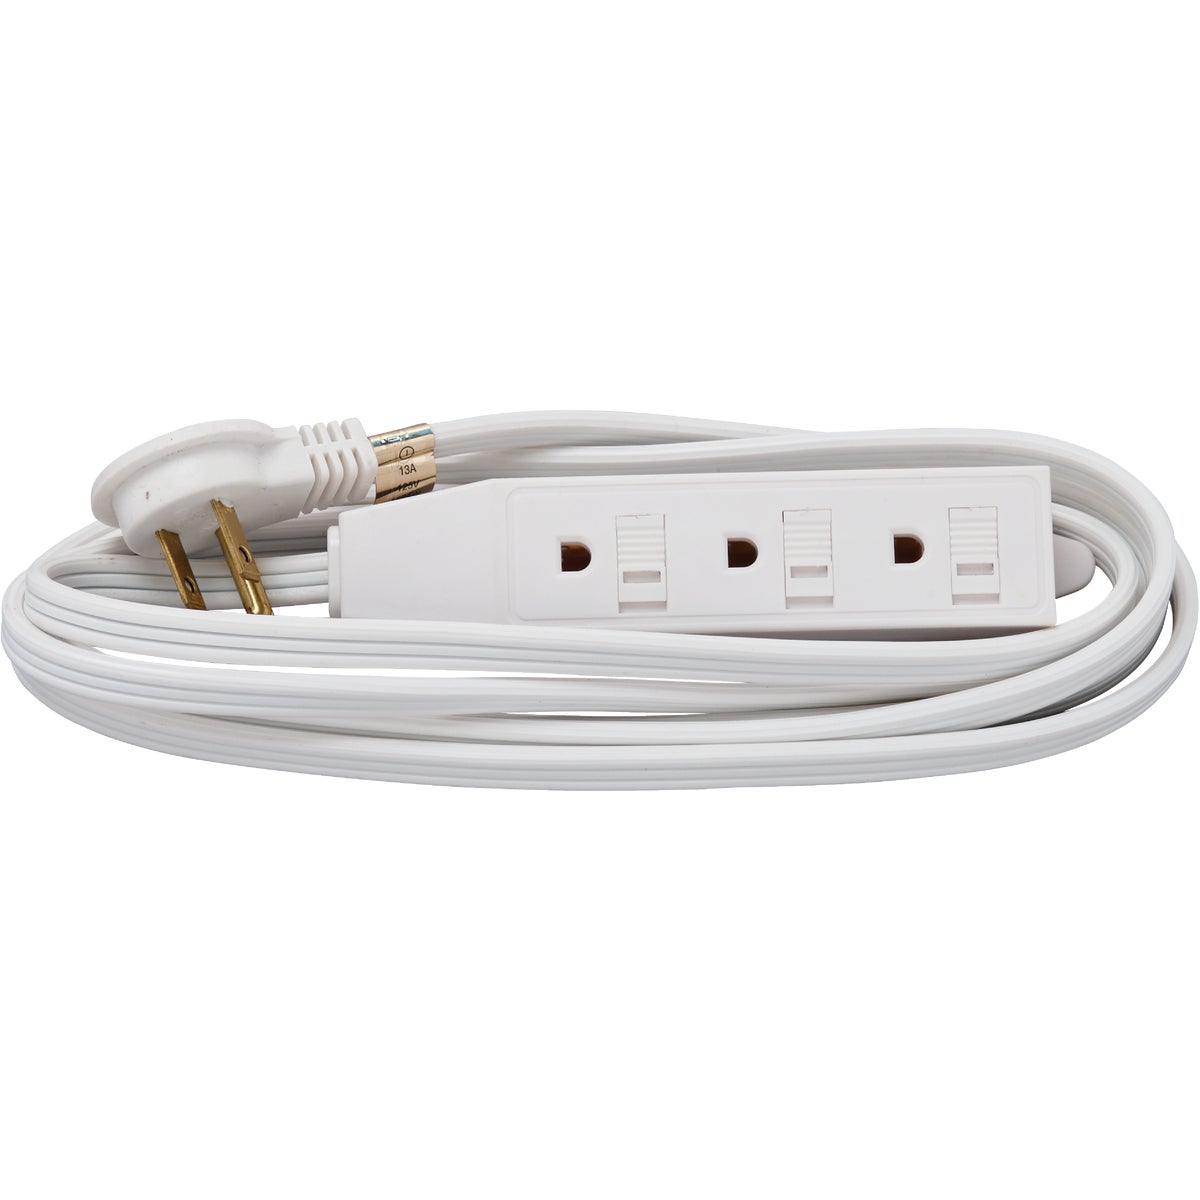 SIM Supply, Inc. IPF-PT2163-8-WH Do it Best 8 Ft. 16/3 Flat Plug White Extension Cord IPF-PT2163-8-WH